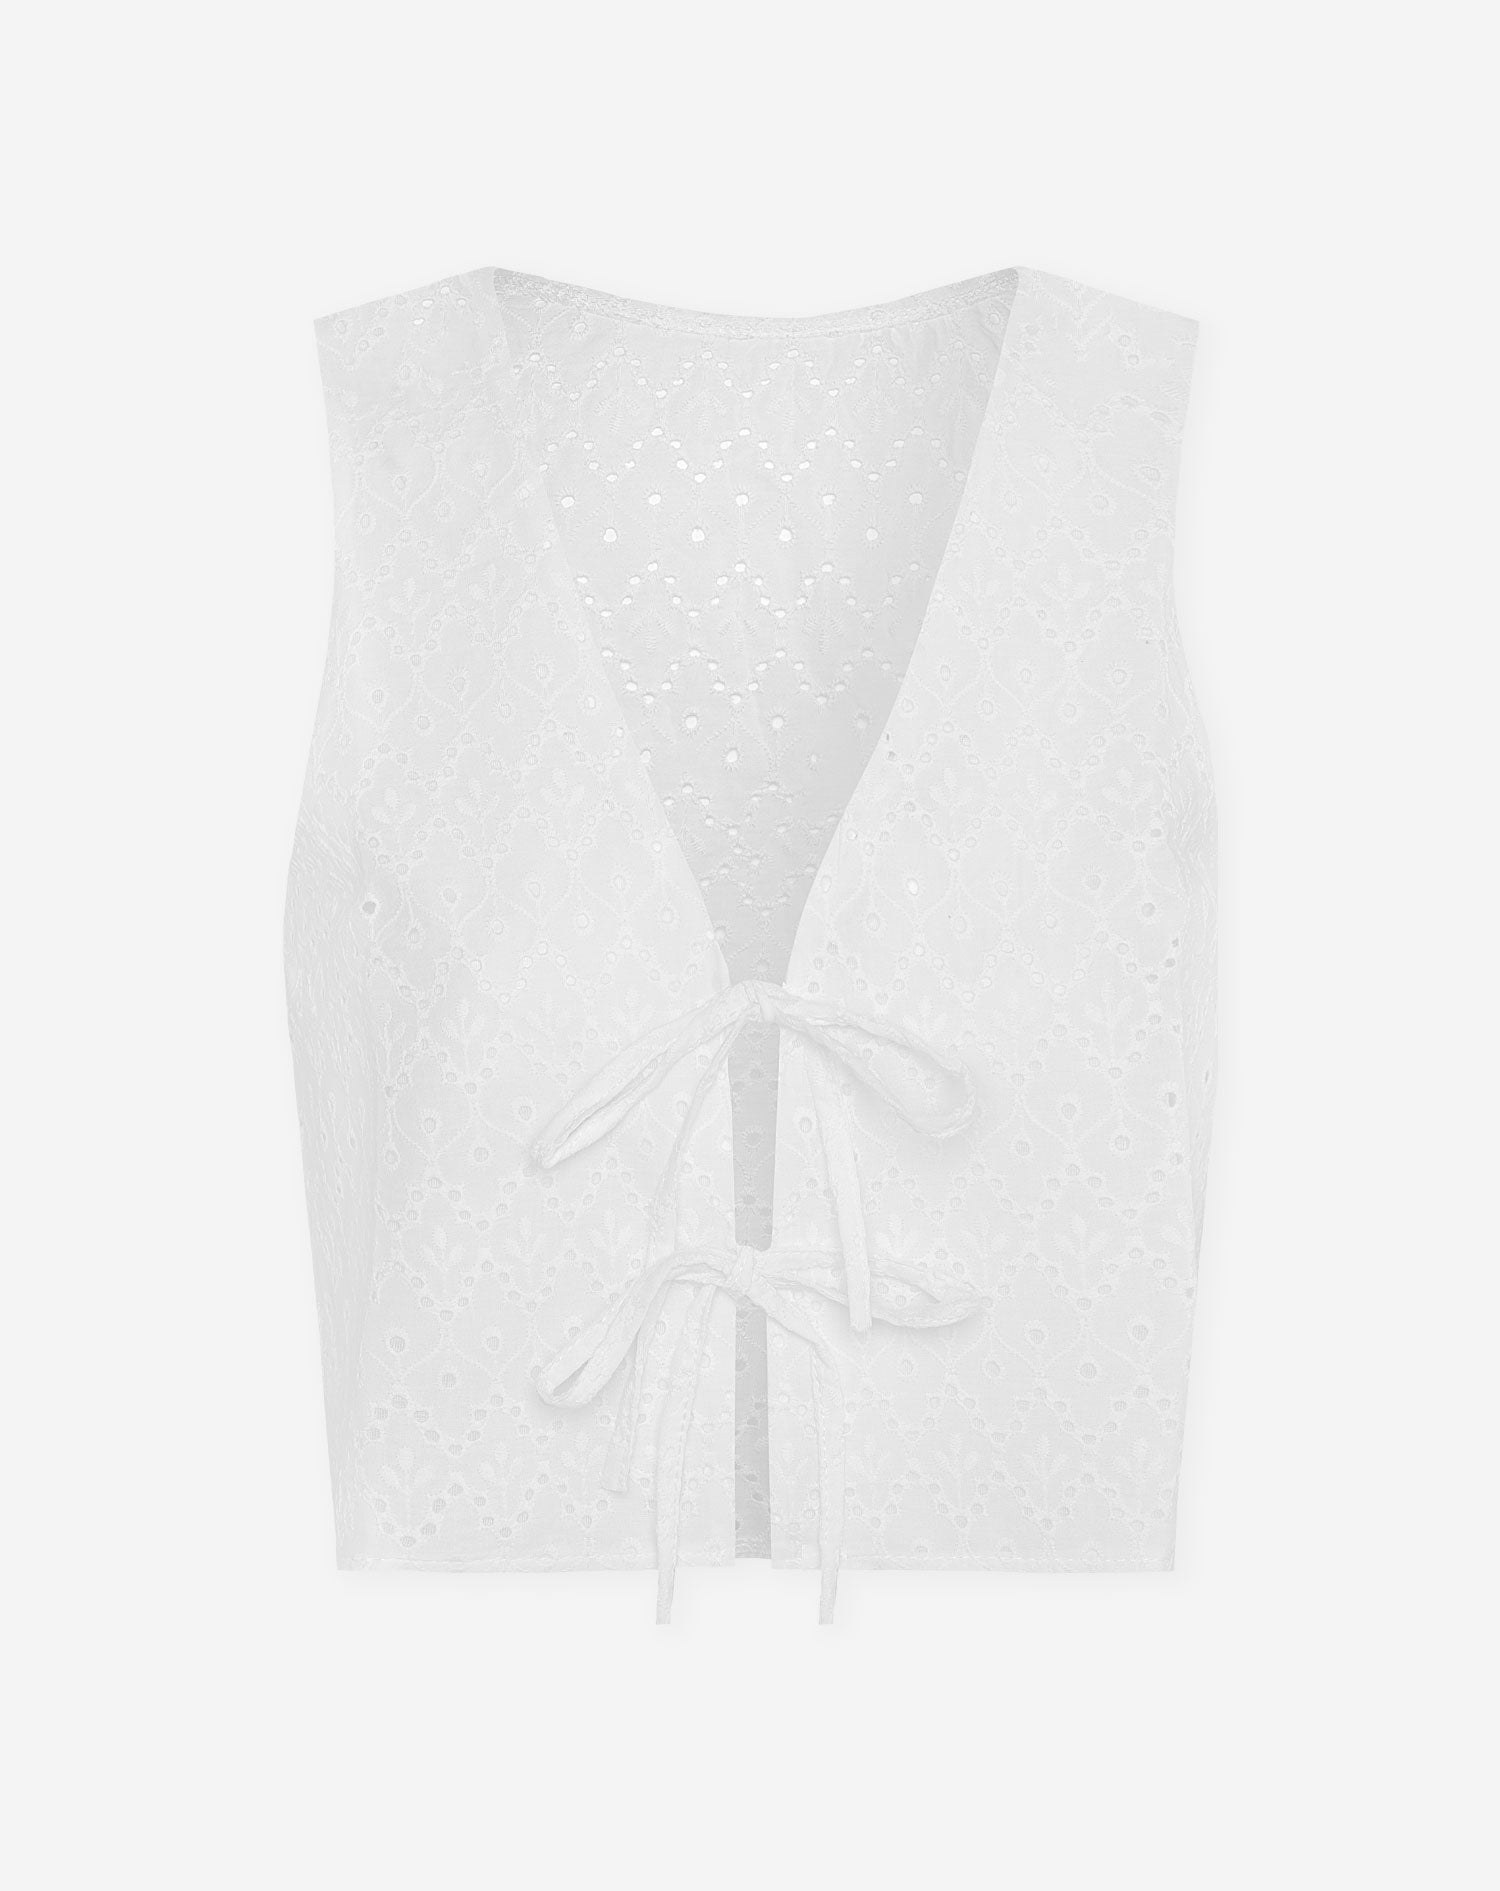 BRODERIE BOWS TOP WHITE